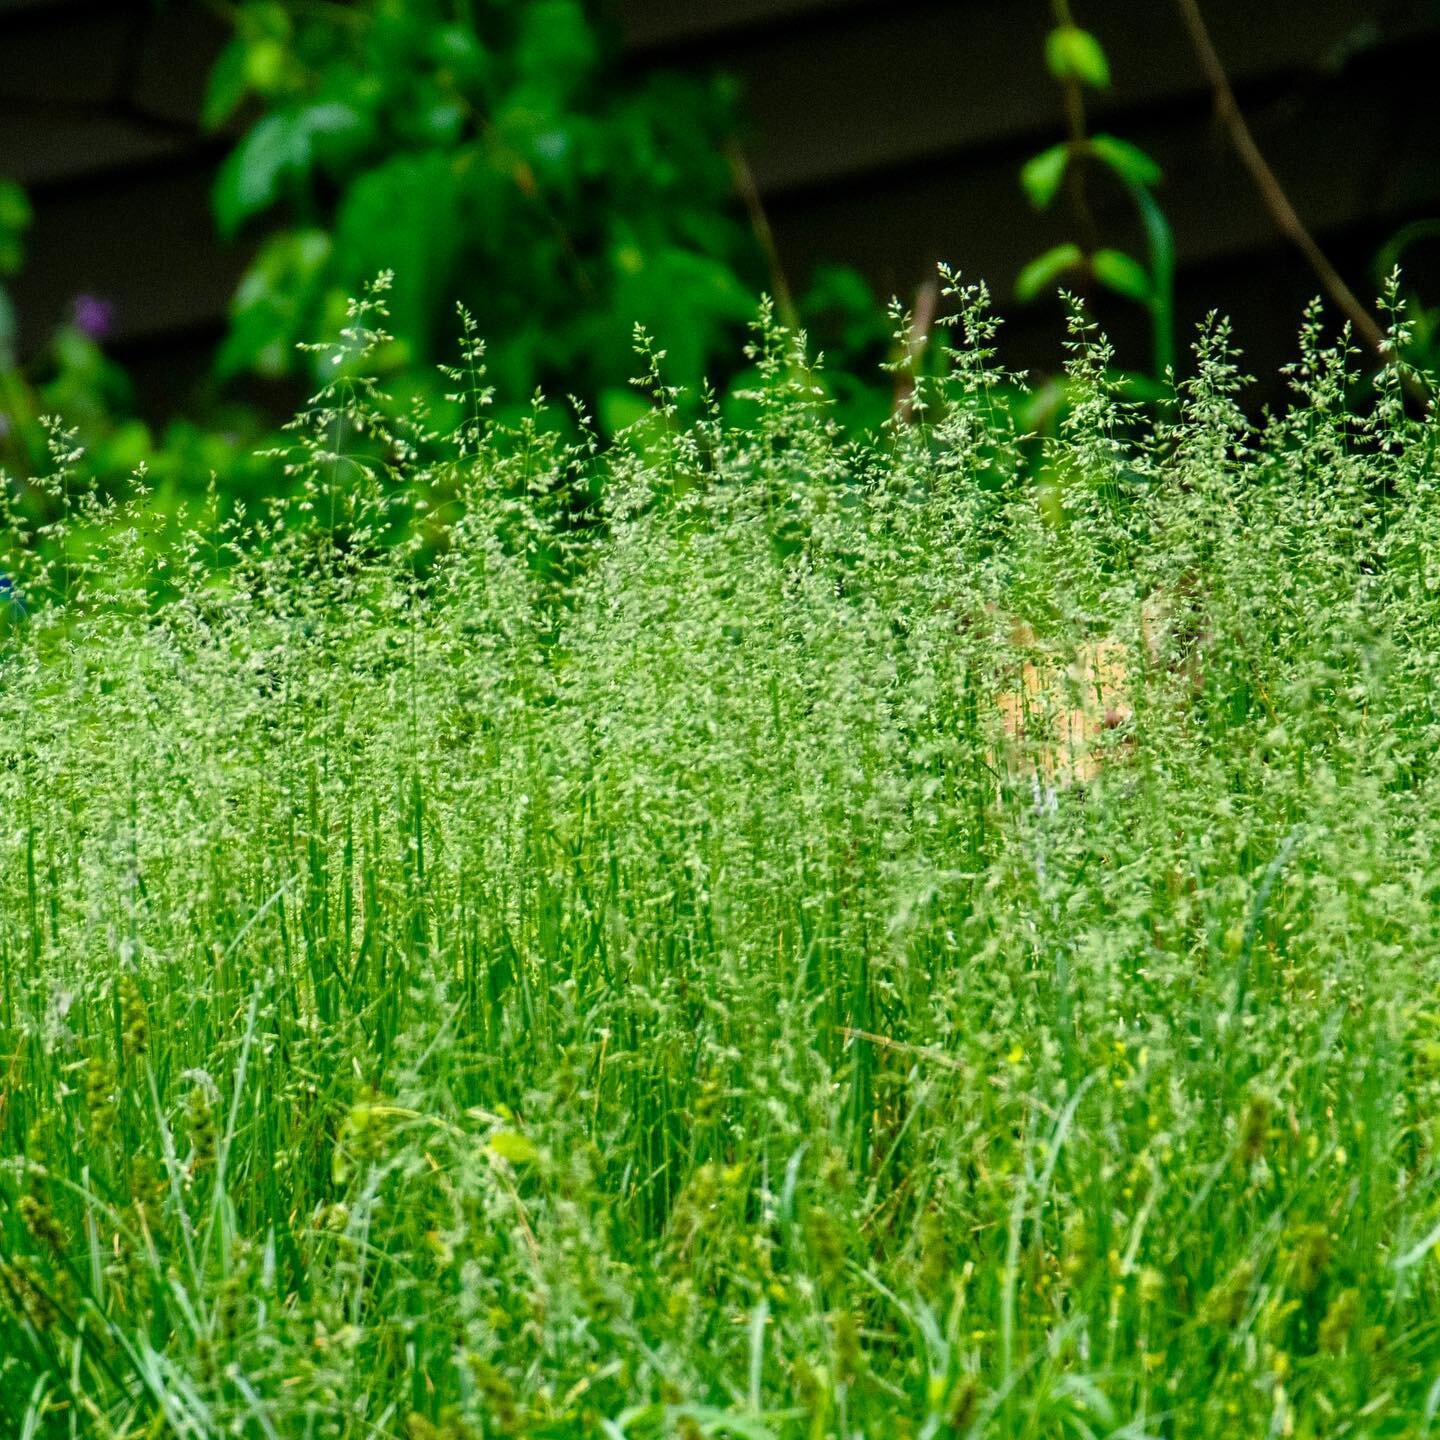 A fox is hiding
In the tall grass by my house.
You&rsquo;re not so sly, fox.

#haiku #haikutoyoutoo #foxhaiku